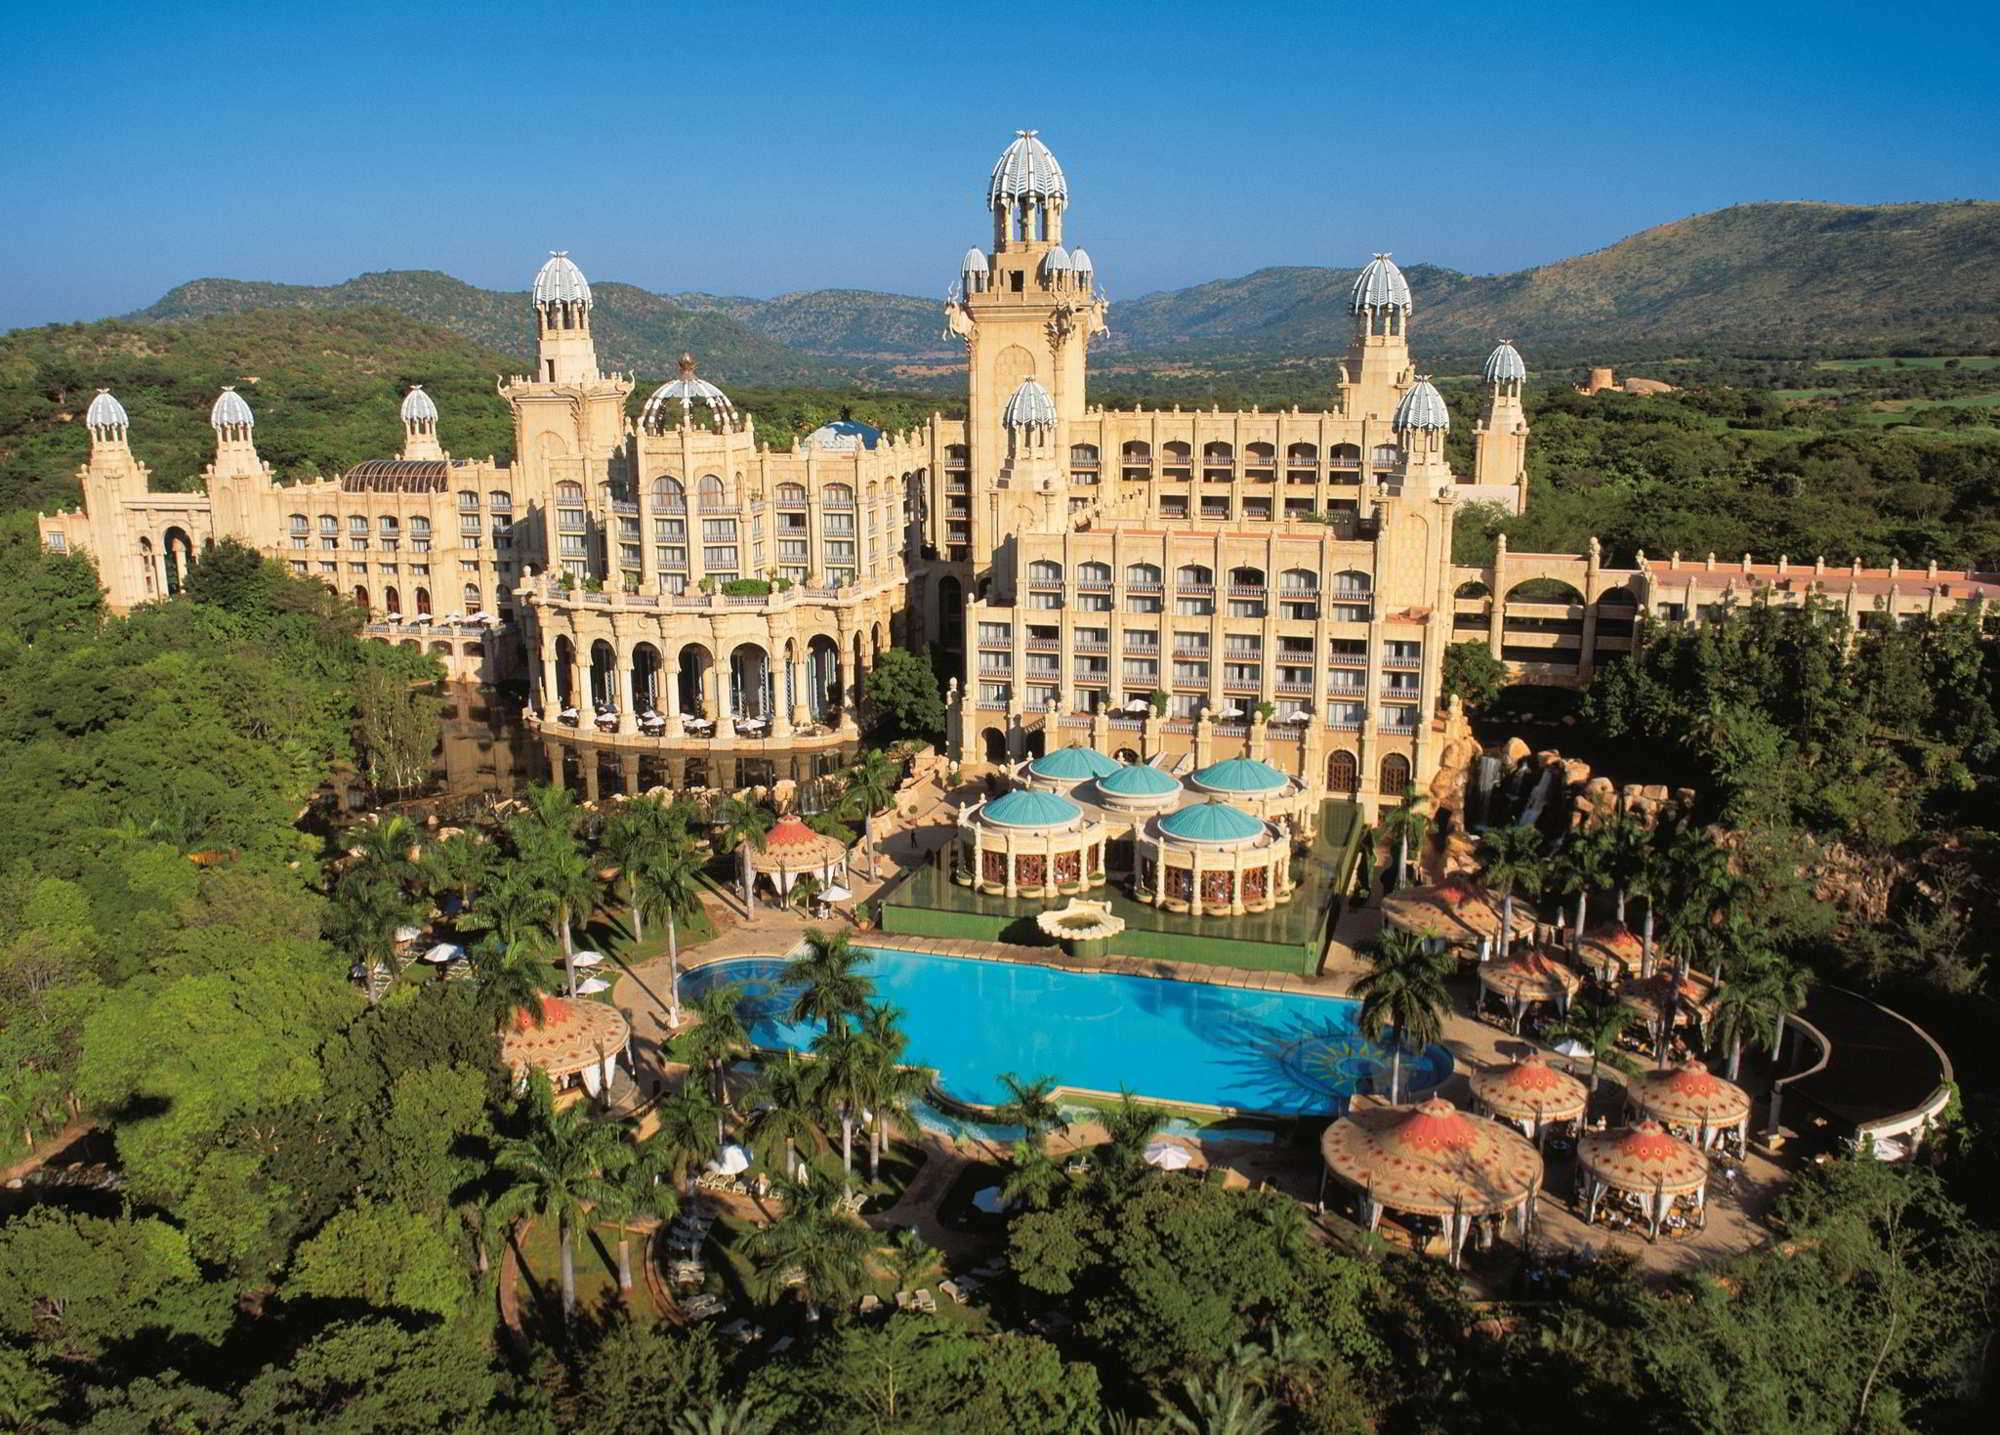 Sun City's Valley of Waves in North-West, is a legendary hub for all kinds of aqua enjoyment and is ideal for a family holiday